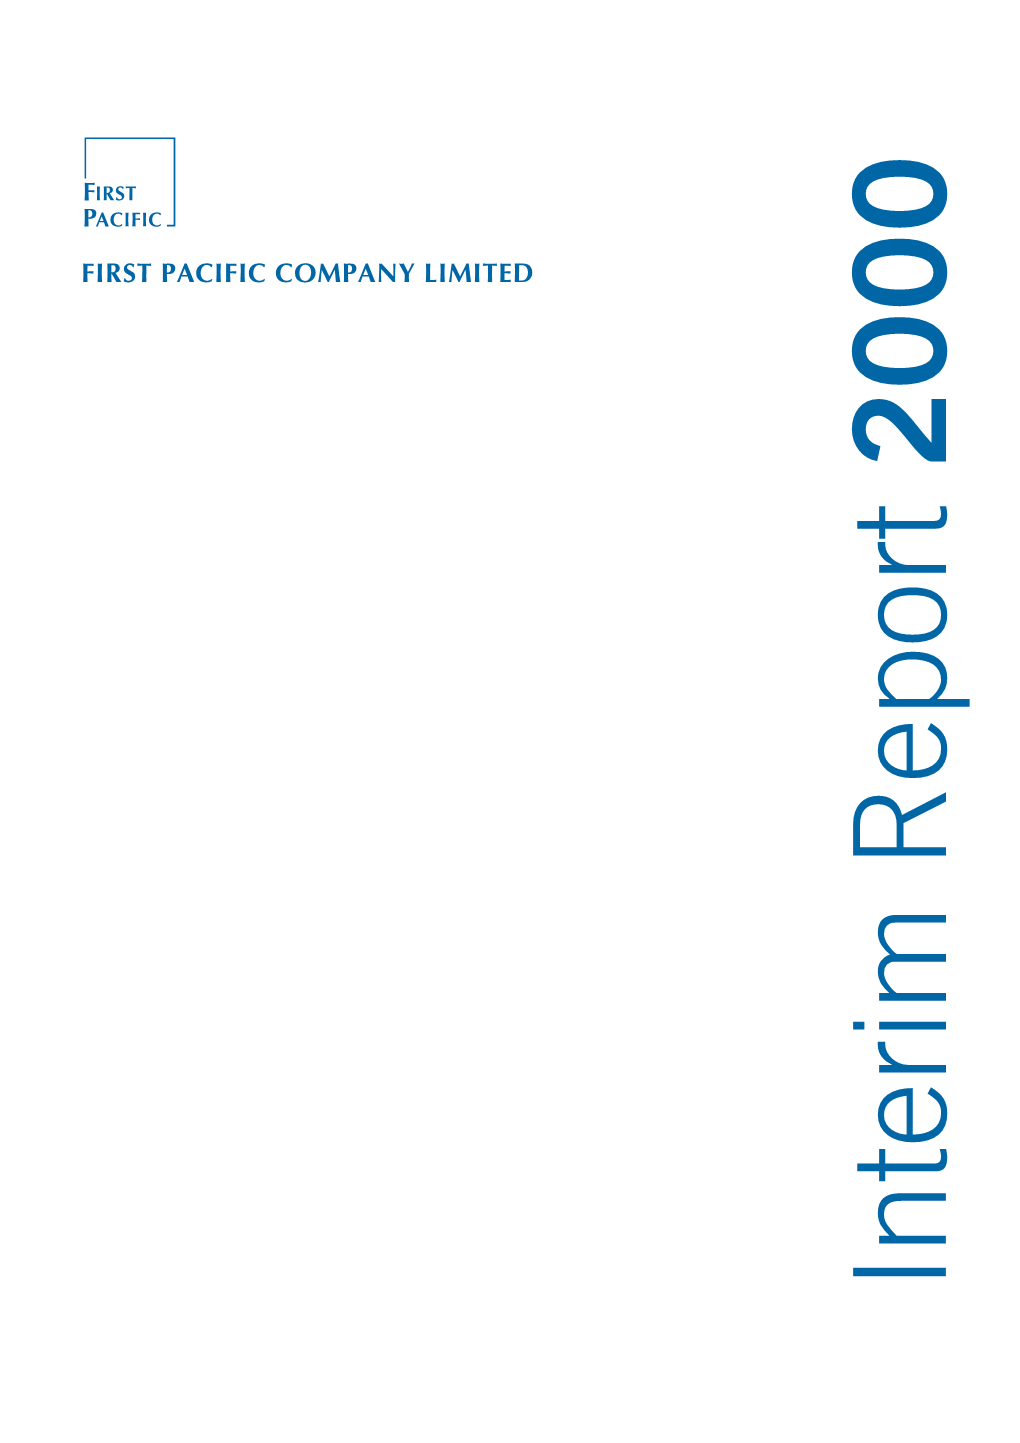 First Pacific Company Limited